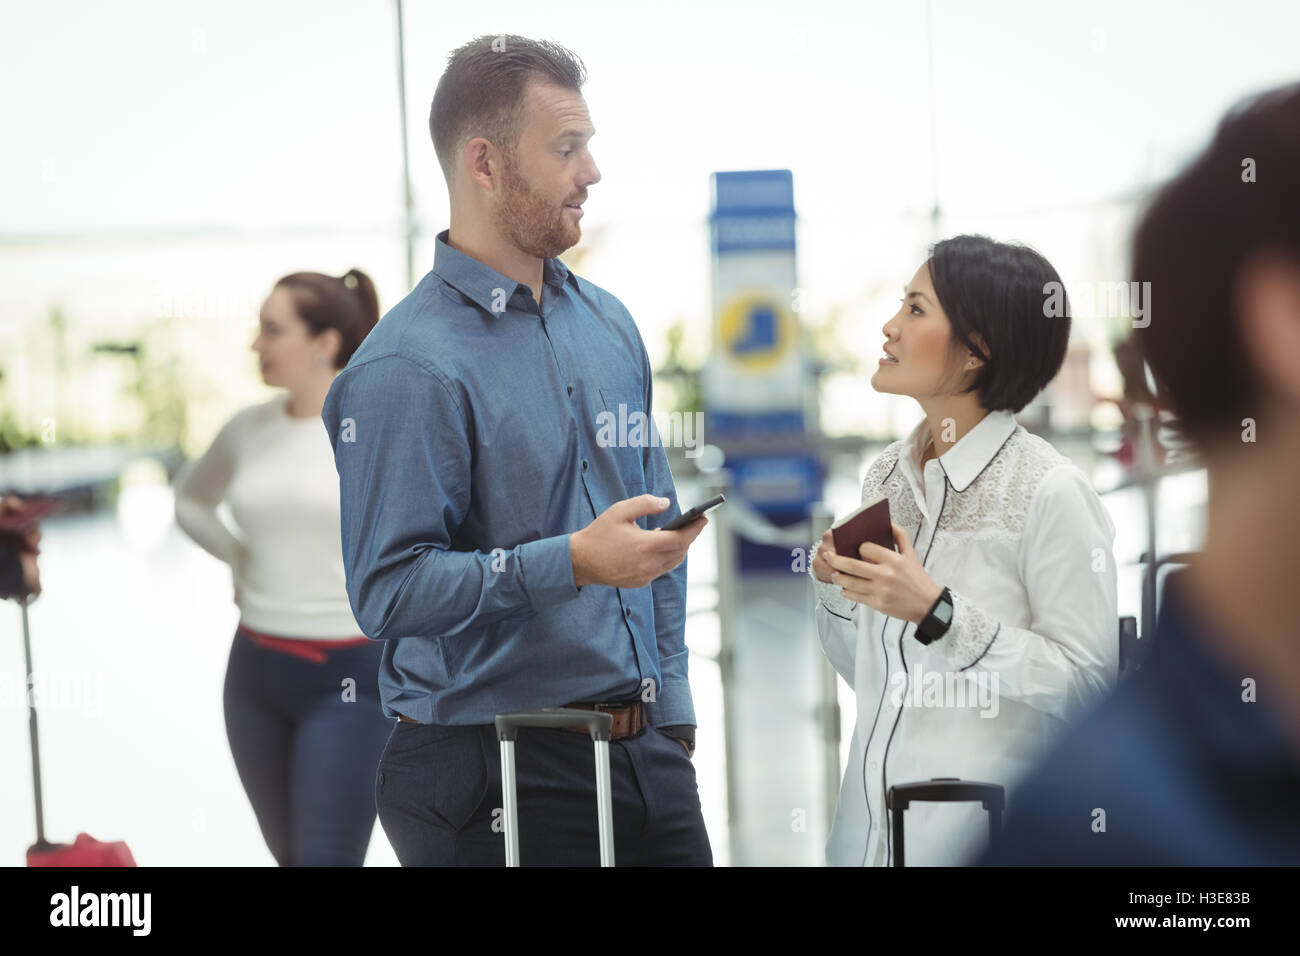 Business people holding boarding pass and using mobile phone Stock Photo